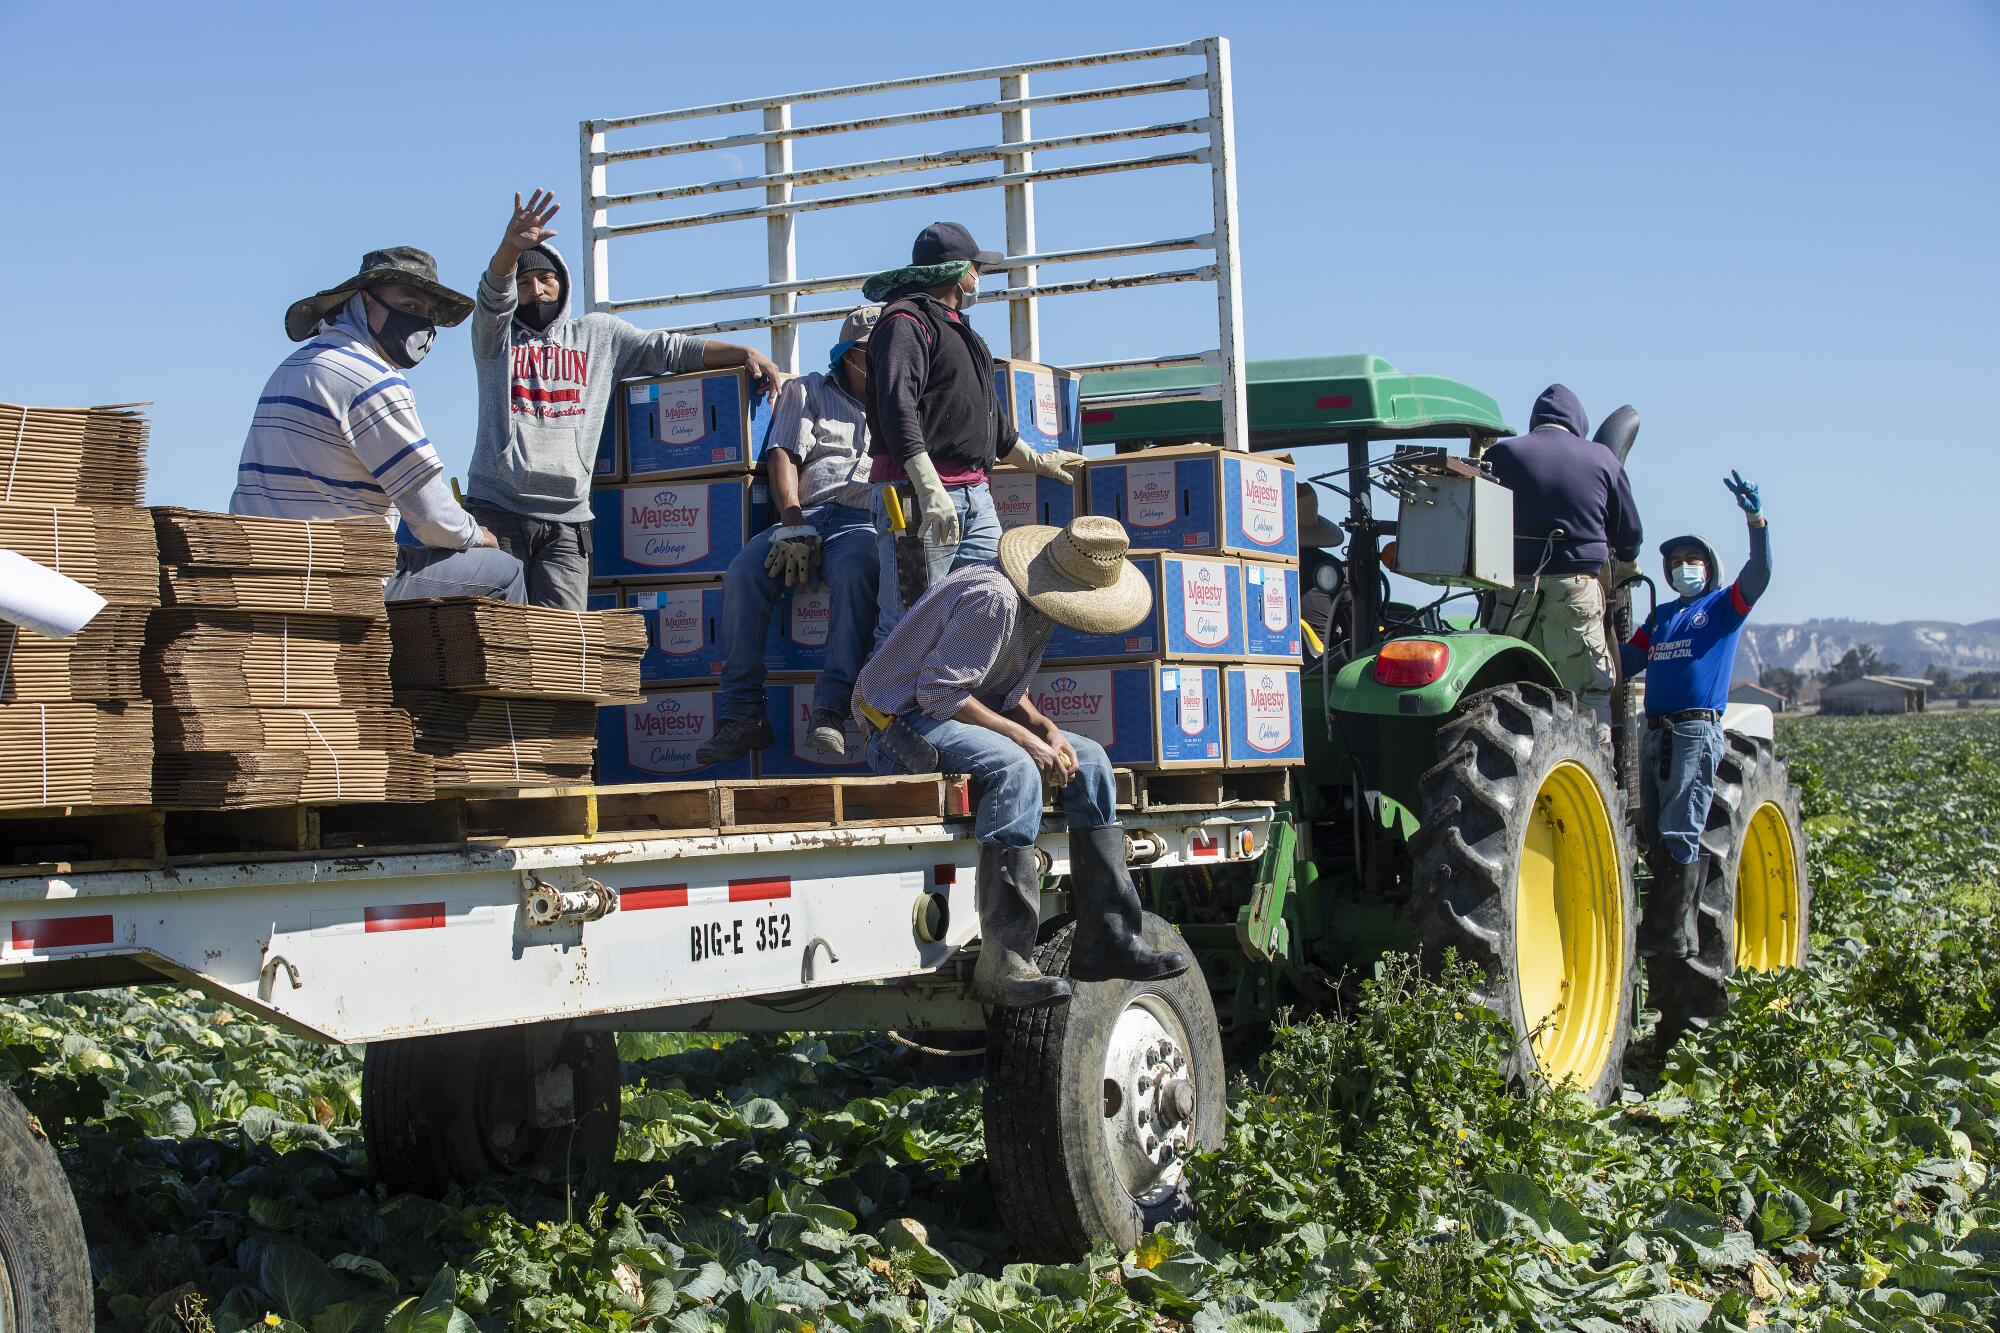 Farmworkers with Big E Produce in Lompoc prepare to take a lunch break after harvesting cabbage.